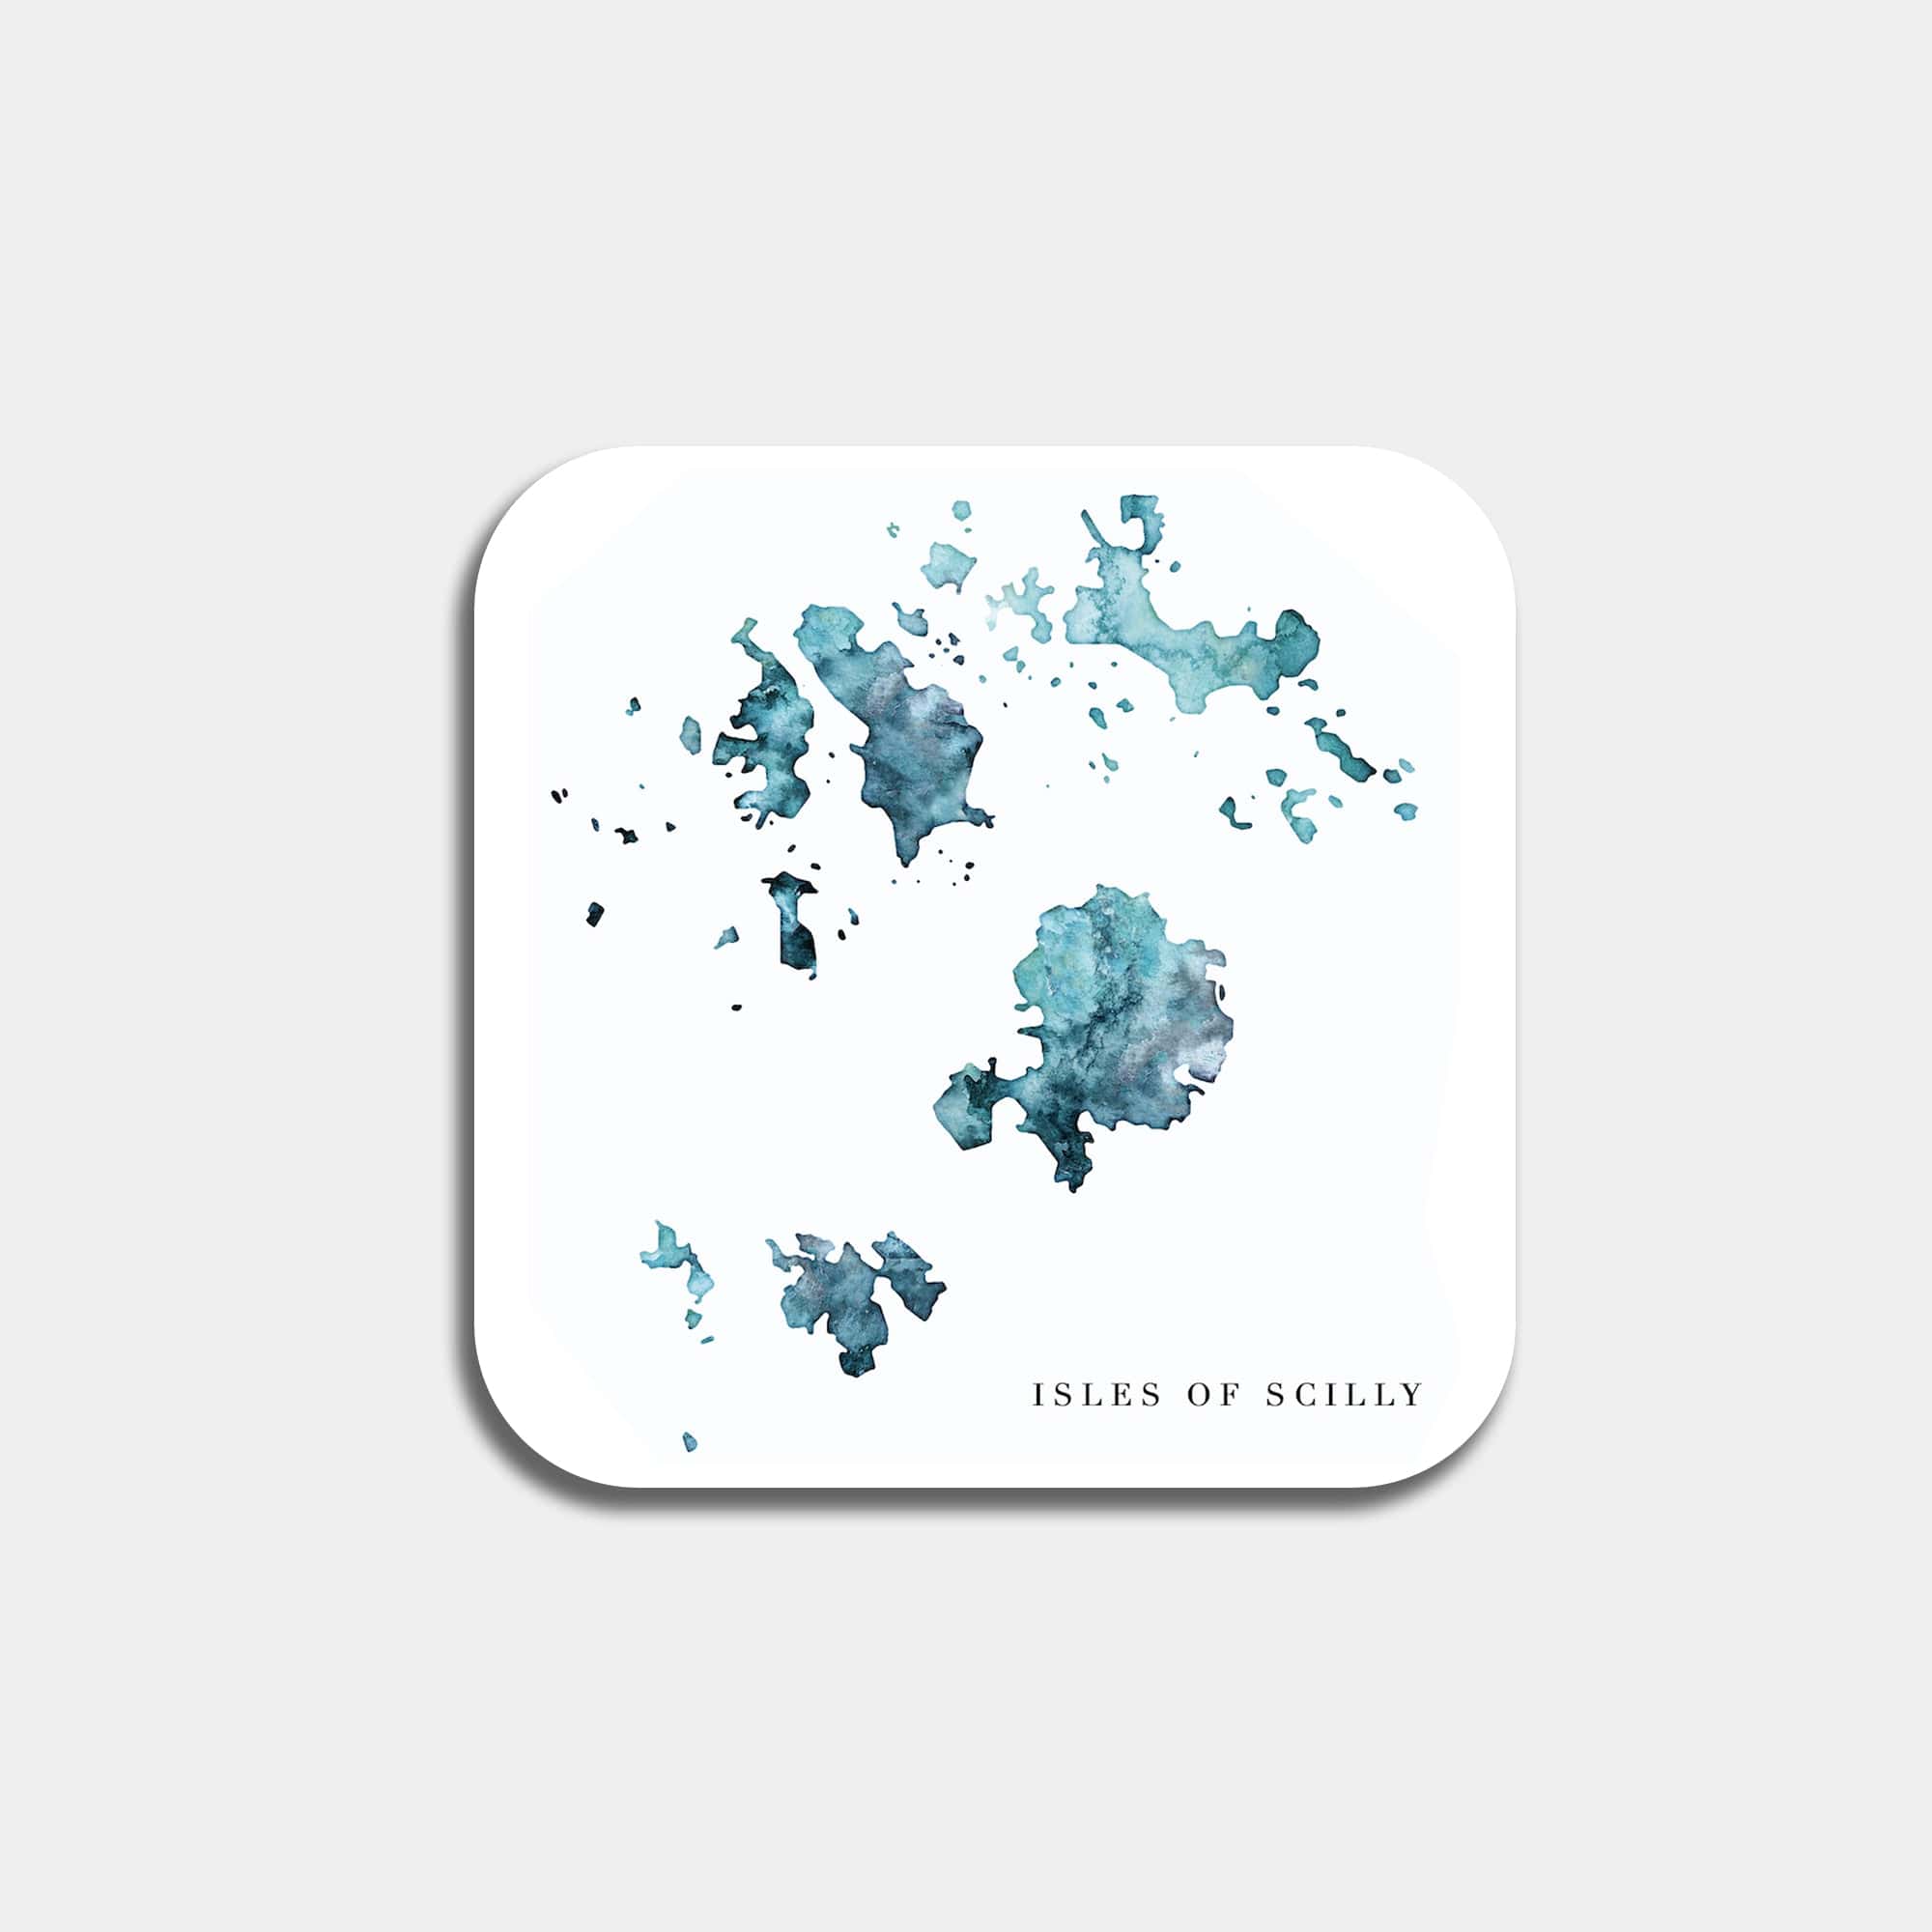 EJayDesign Kitchen Coaster Isles of scilly Coaster Watercolour Map